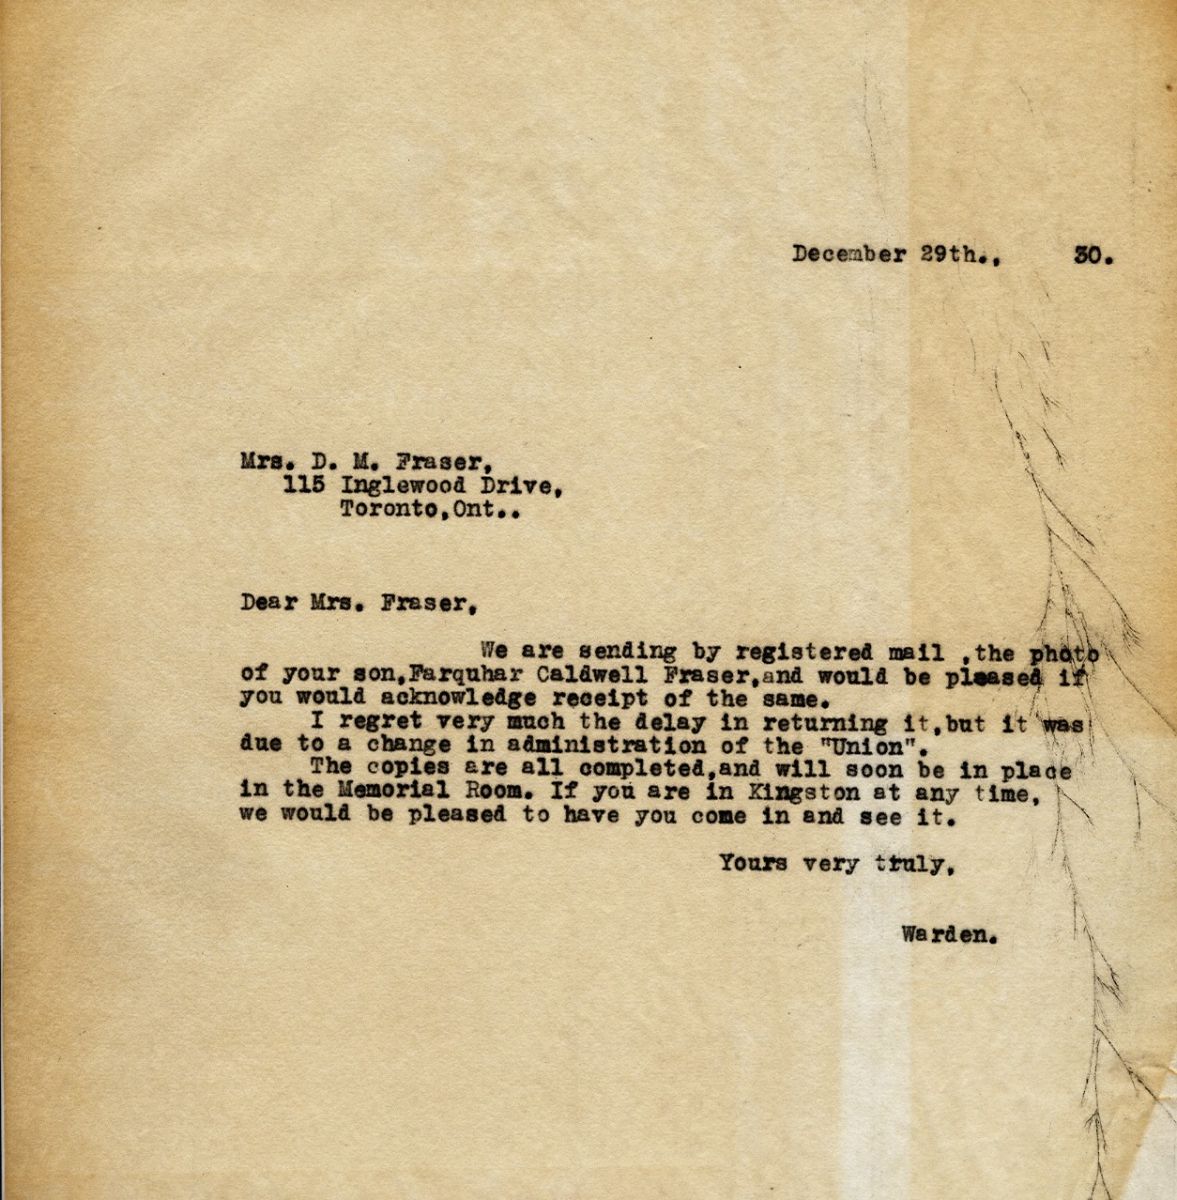 Letter from the Warden to Mrs. D.M. Fraser, 29th December 1930